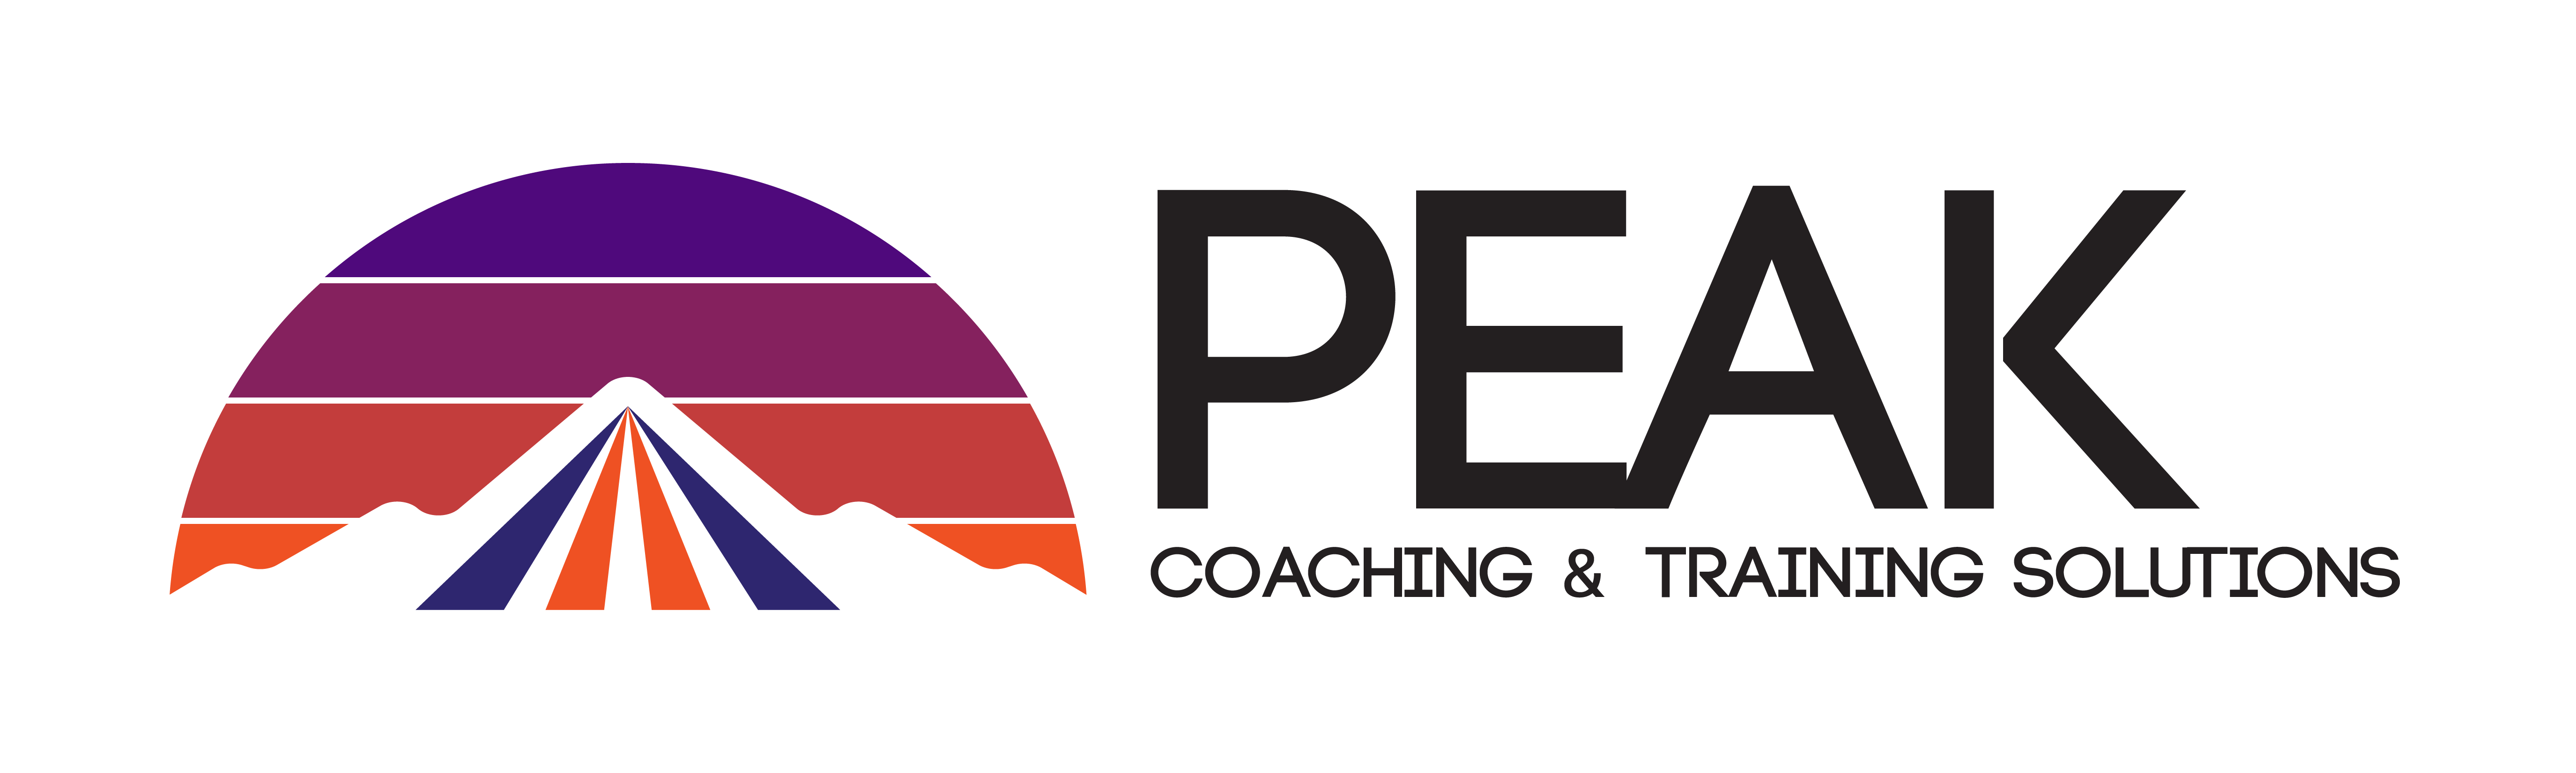 Peak Coaching and Training Solutions